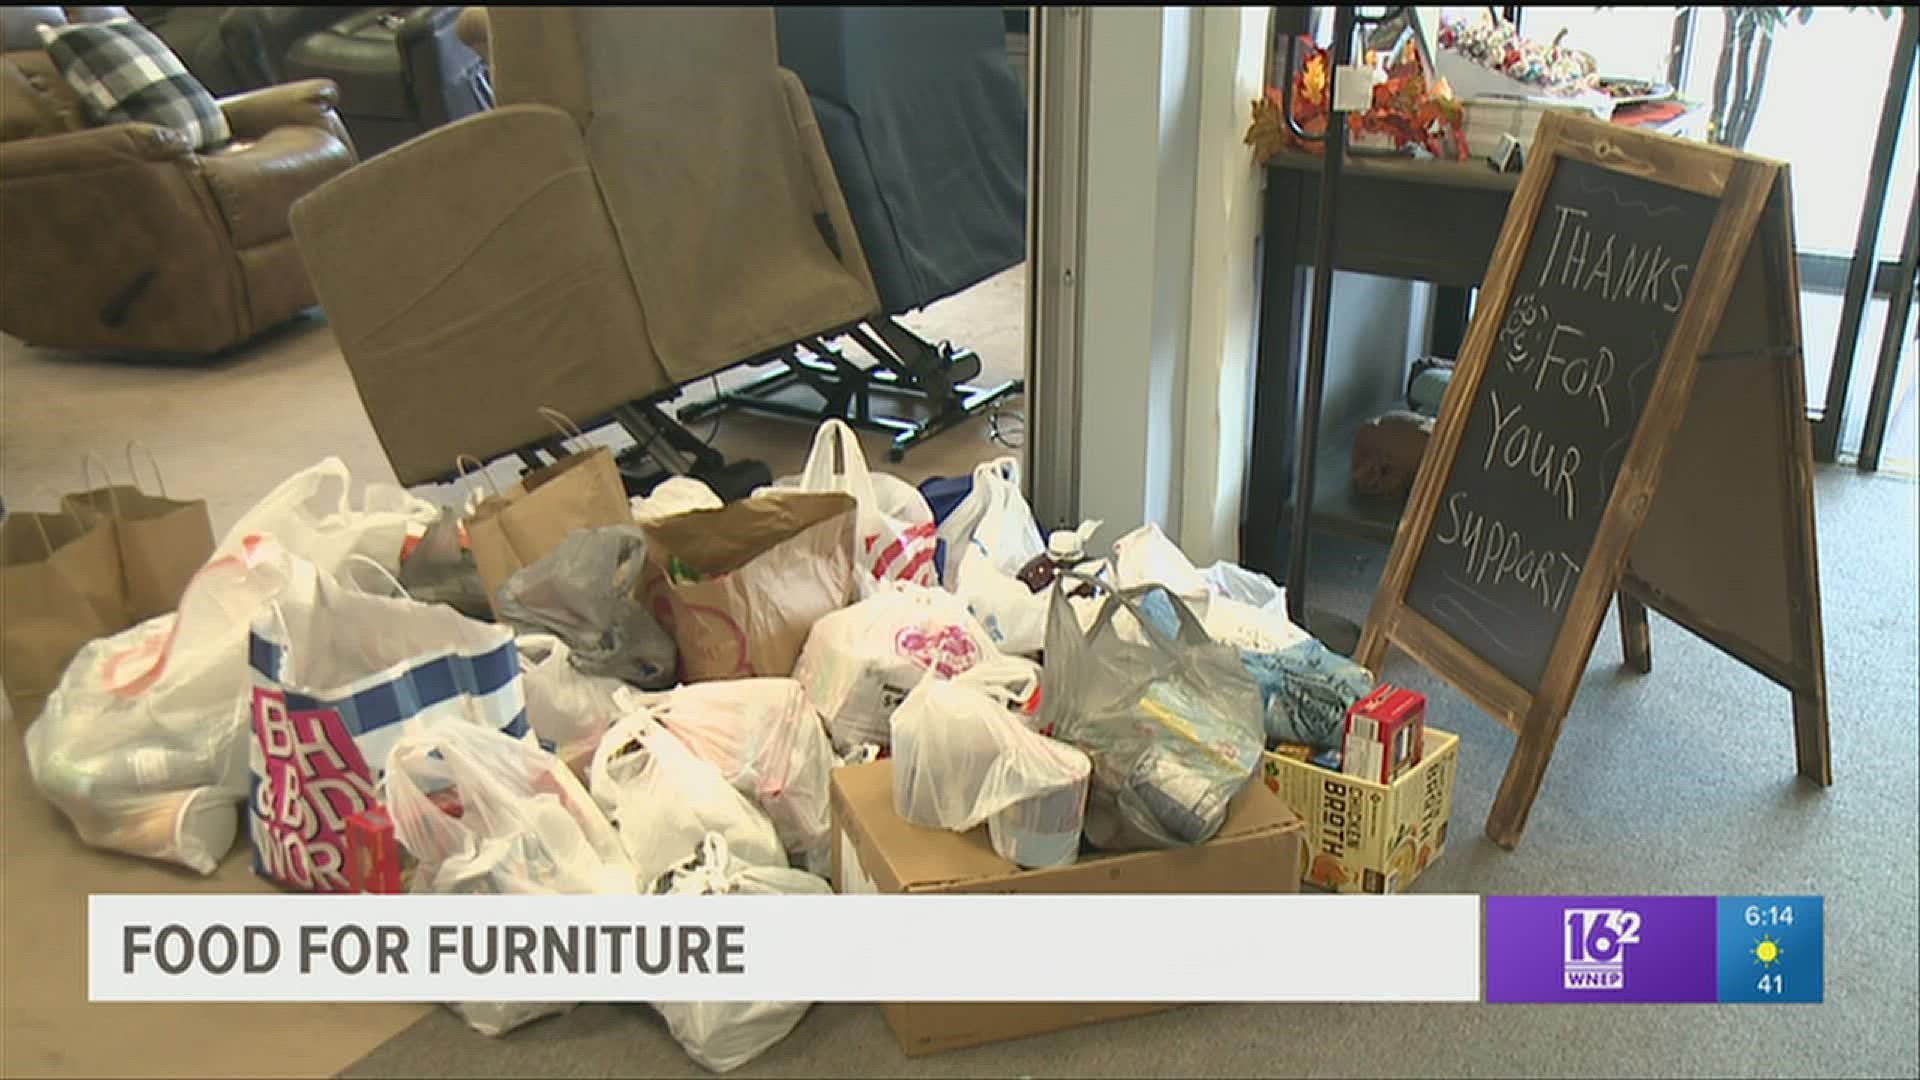 The food drive was held at Berger's Furniture & Mattress.